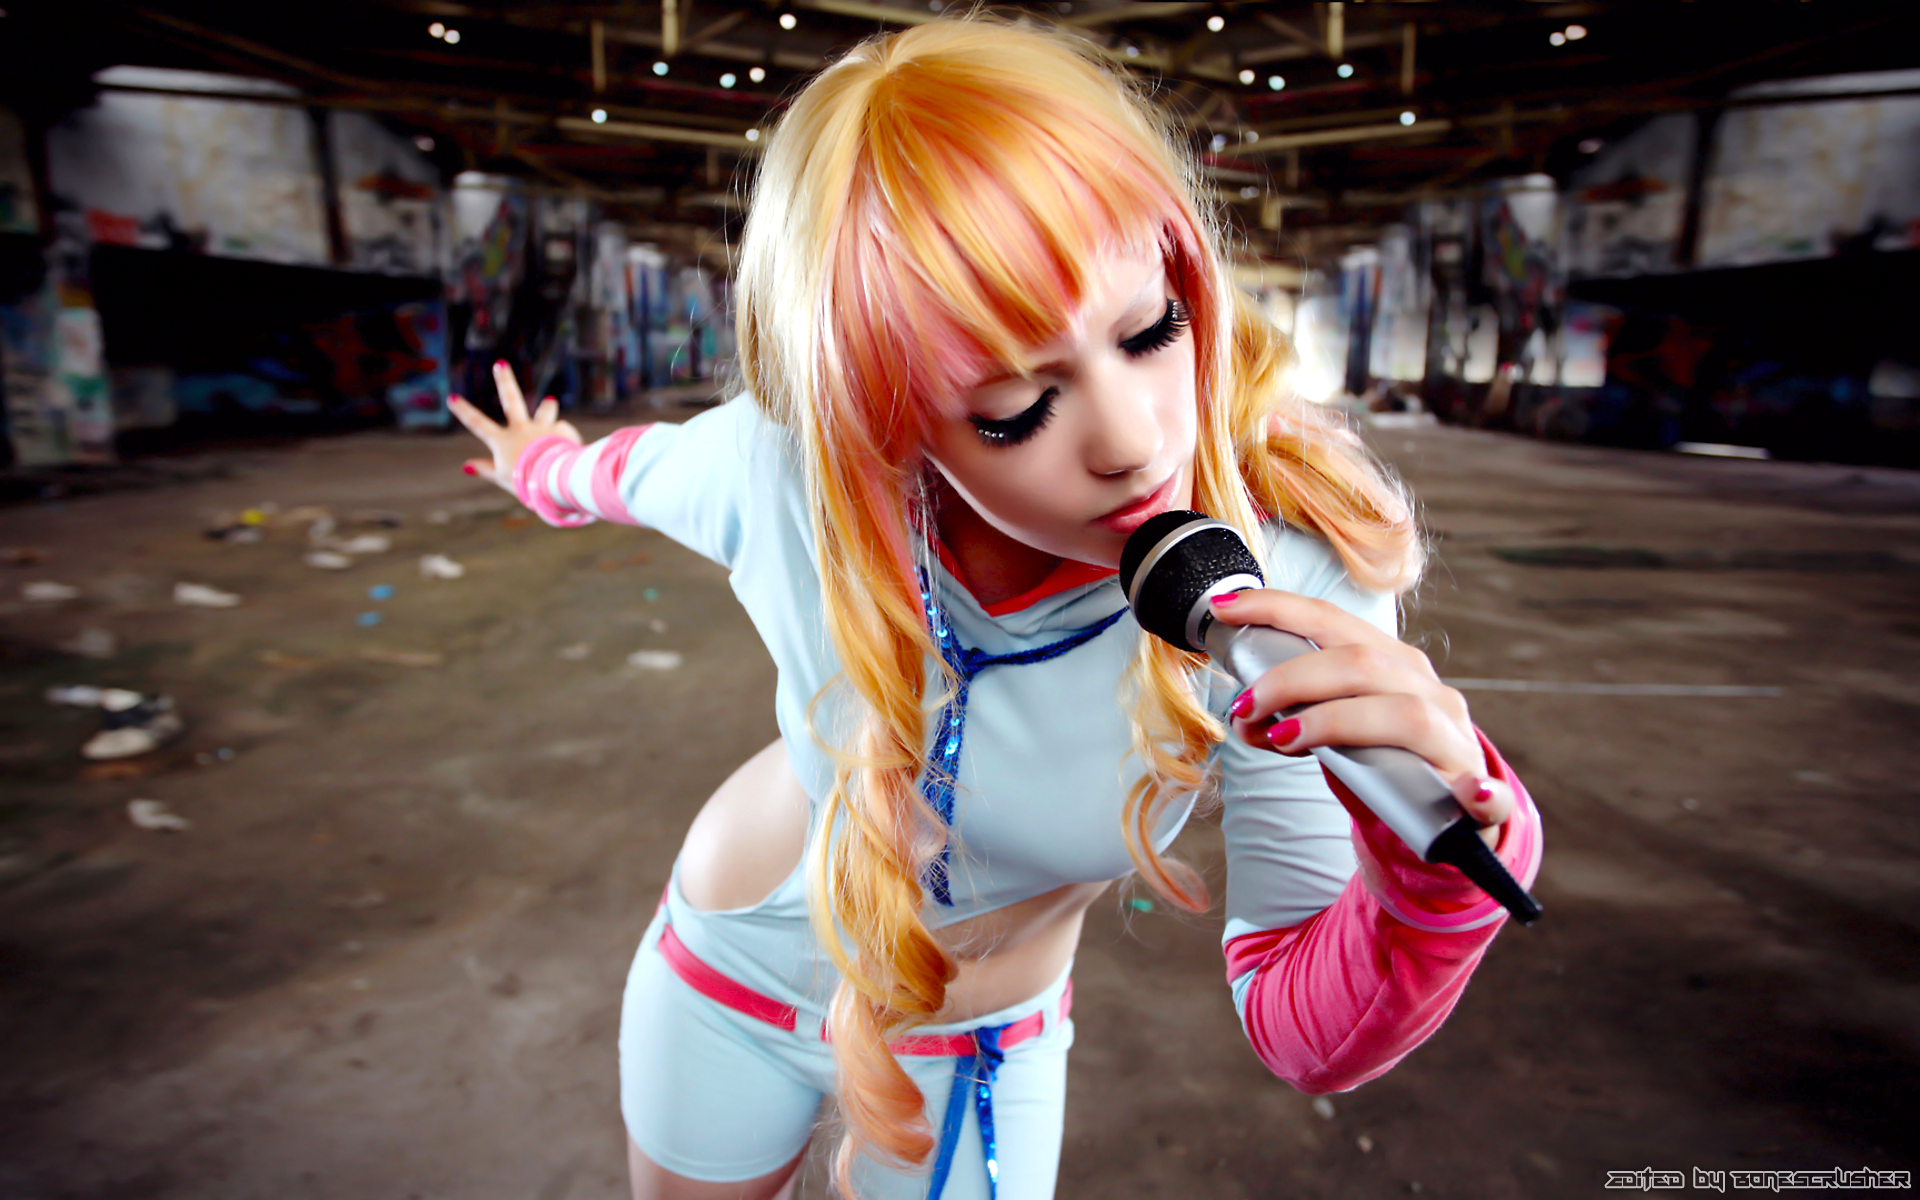 cosplay girl wallpaper,clothing,cosplay,costume,blond,anime